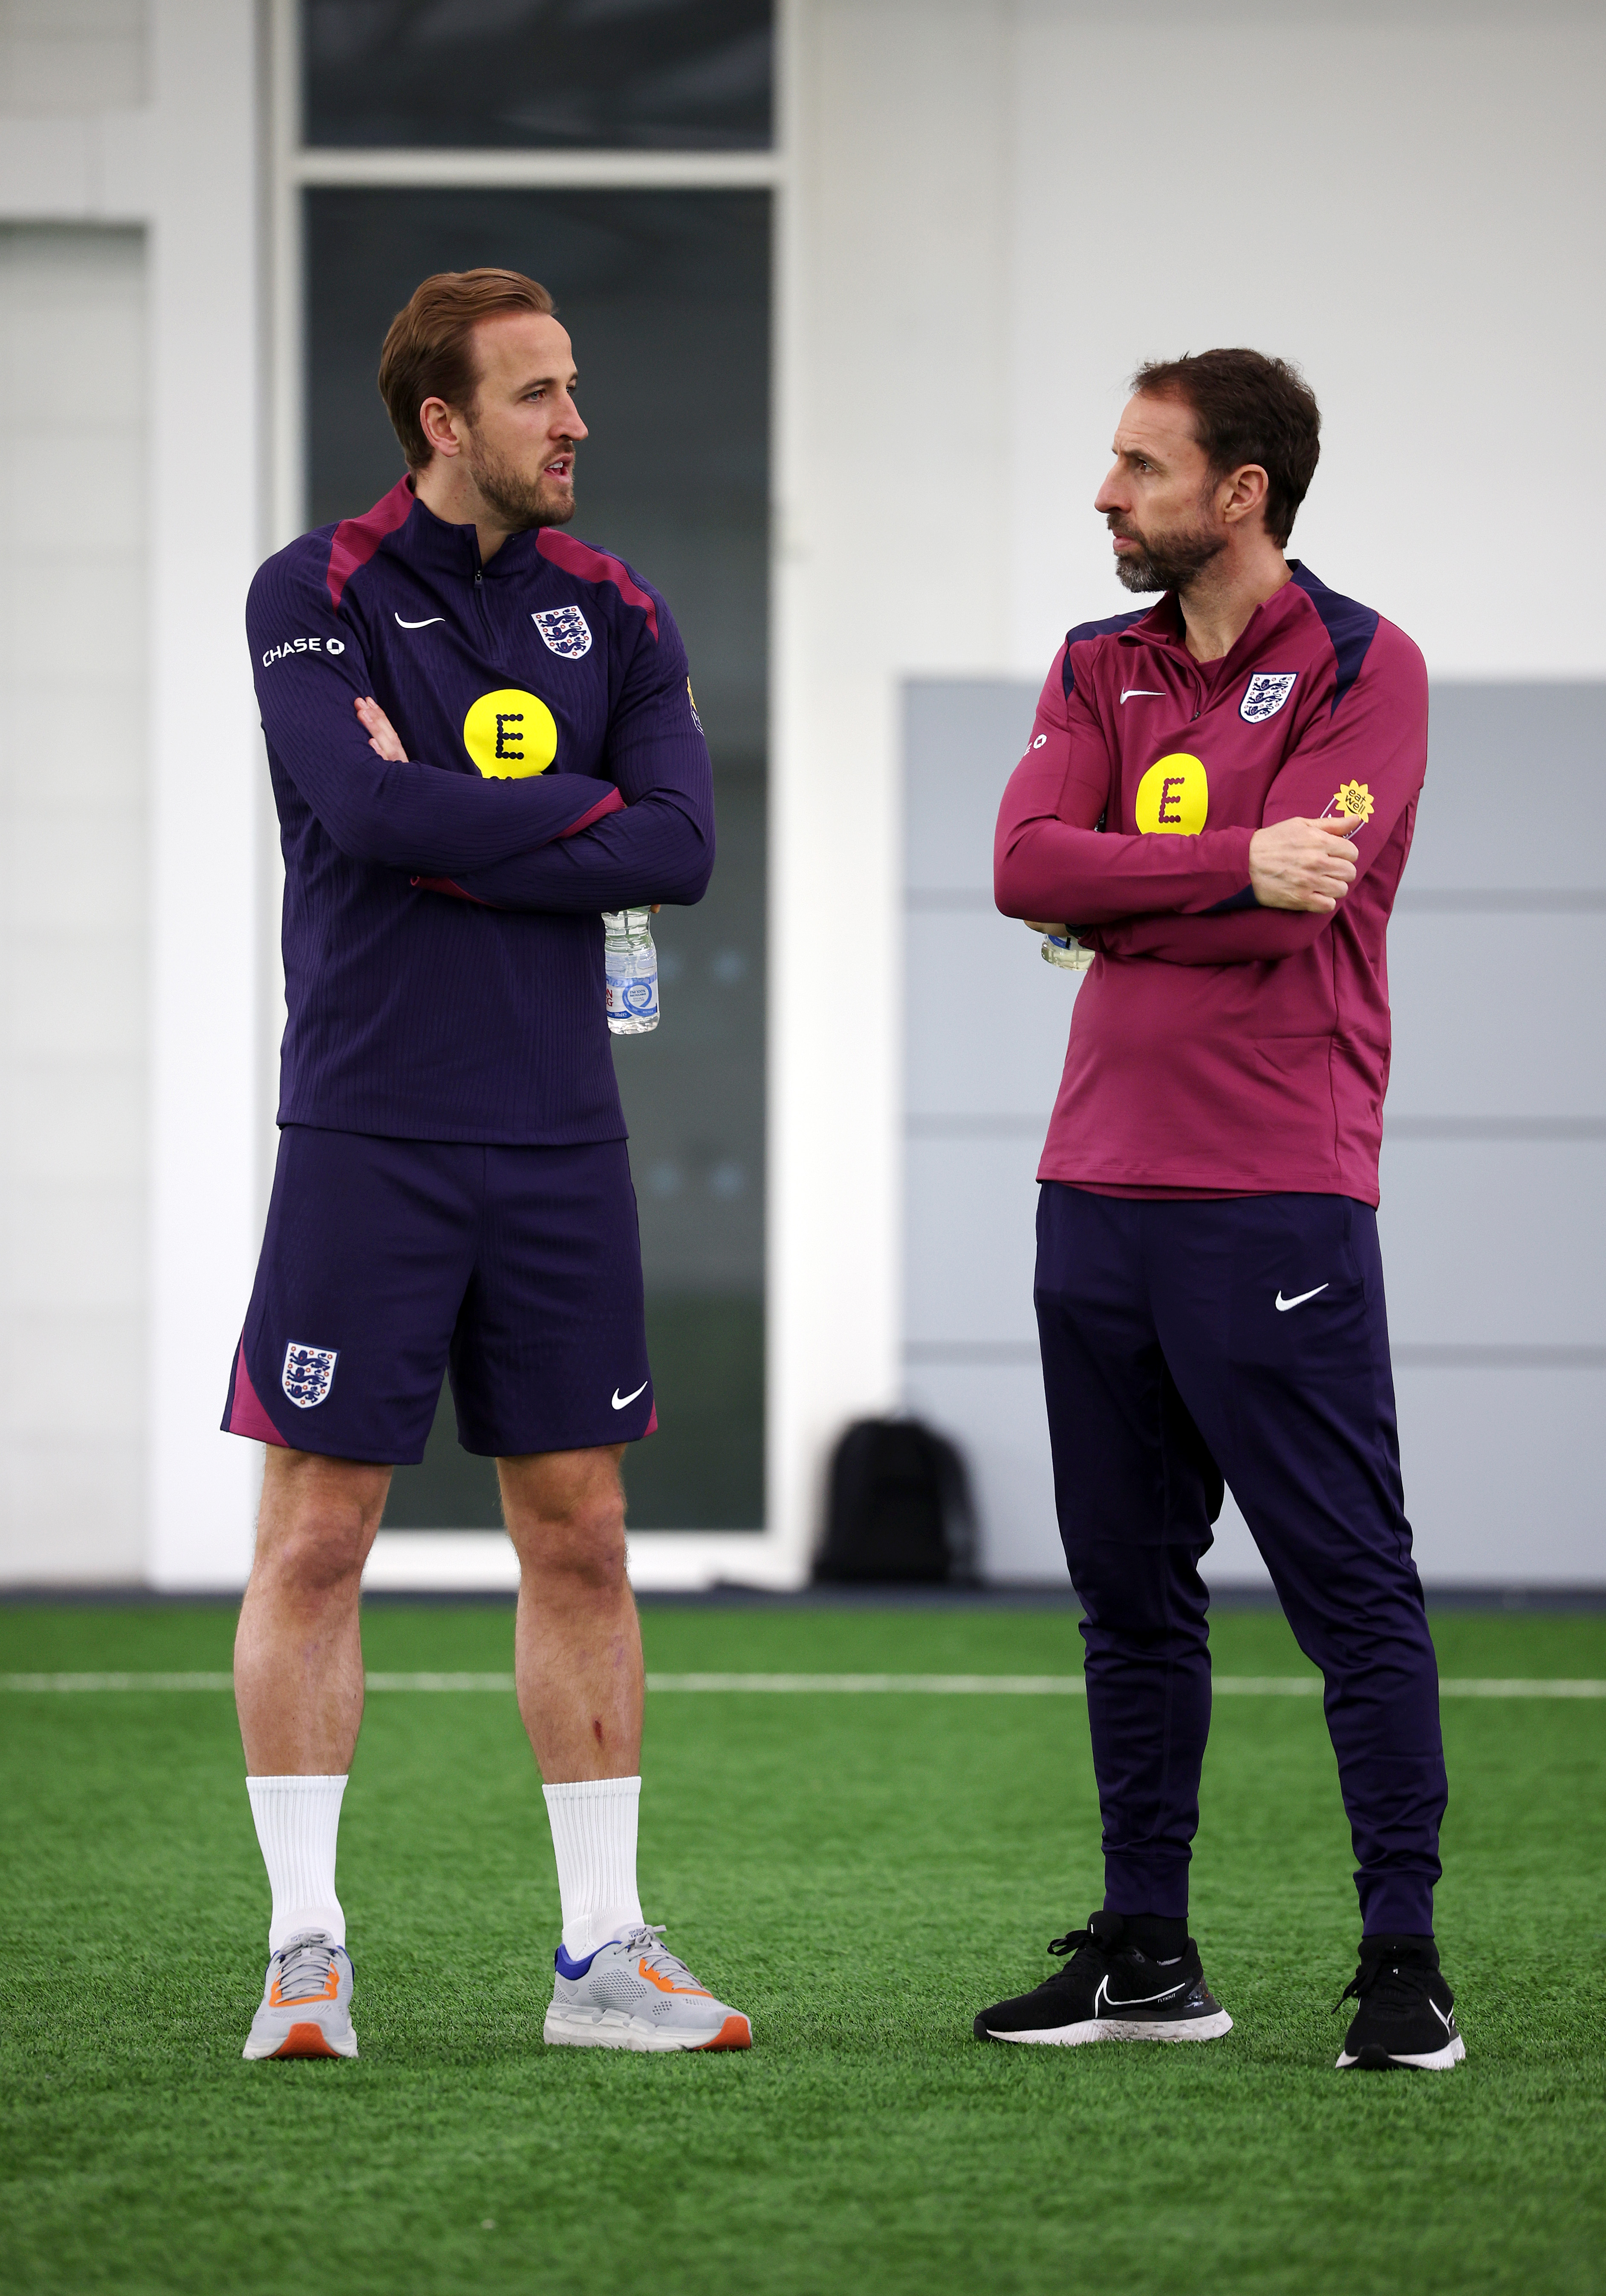 Skipper Harry Kane, here chatting with manager Gareth Southgate, could have been surpassed as England's key player by Bellingham